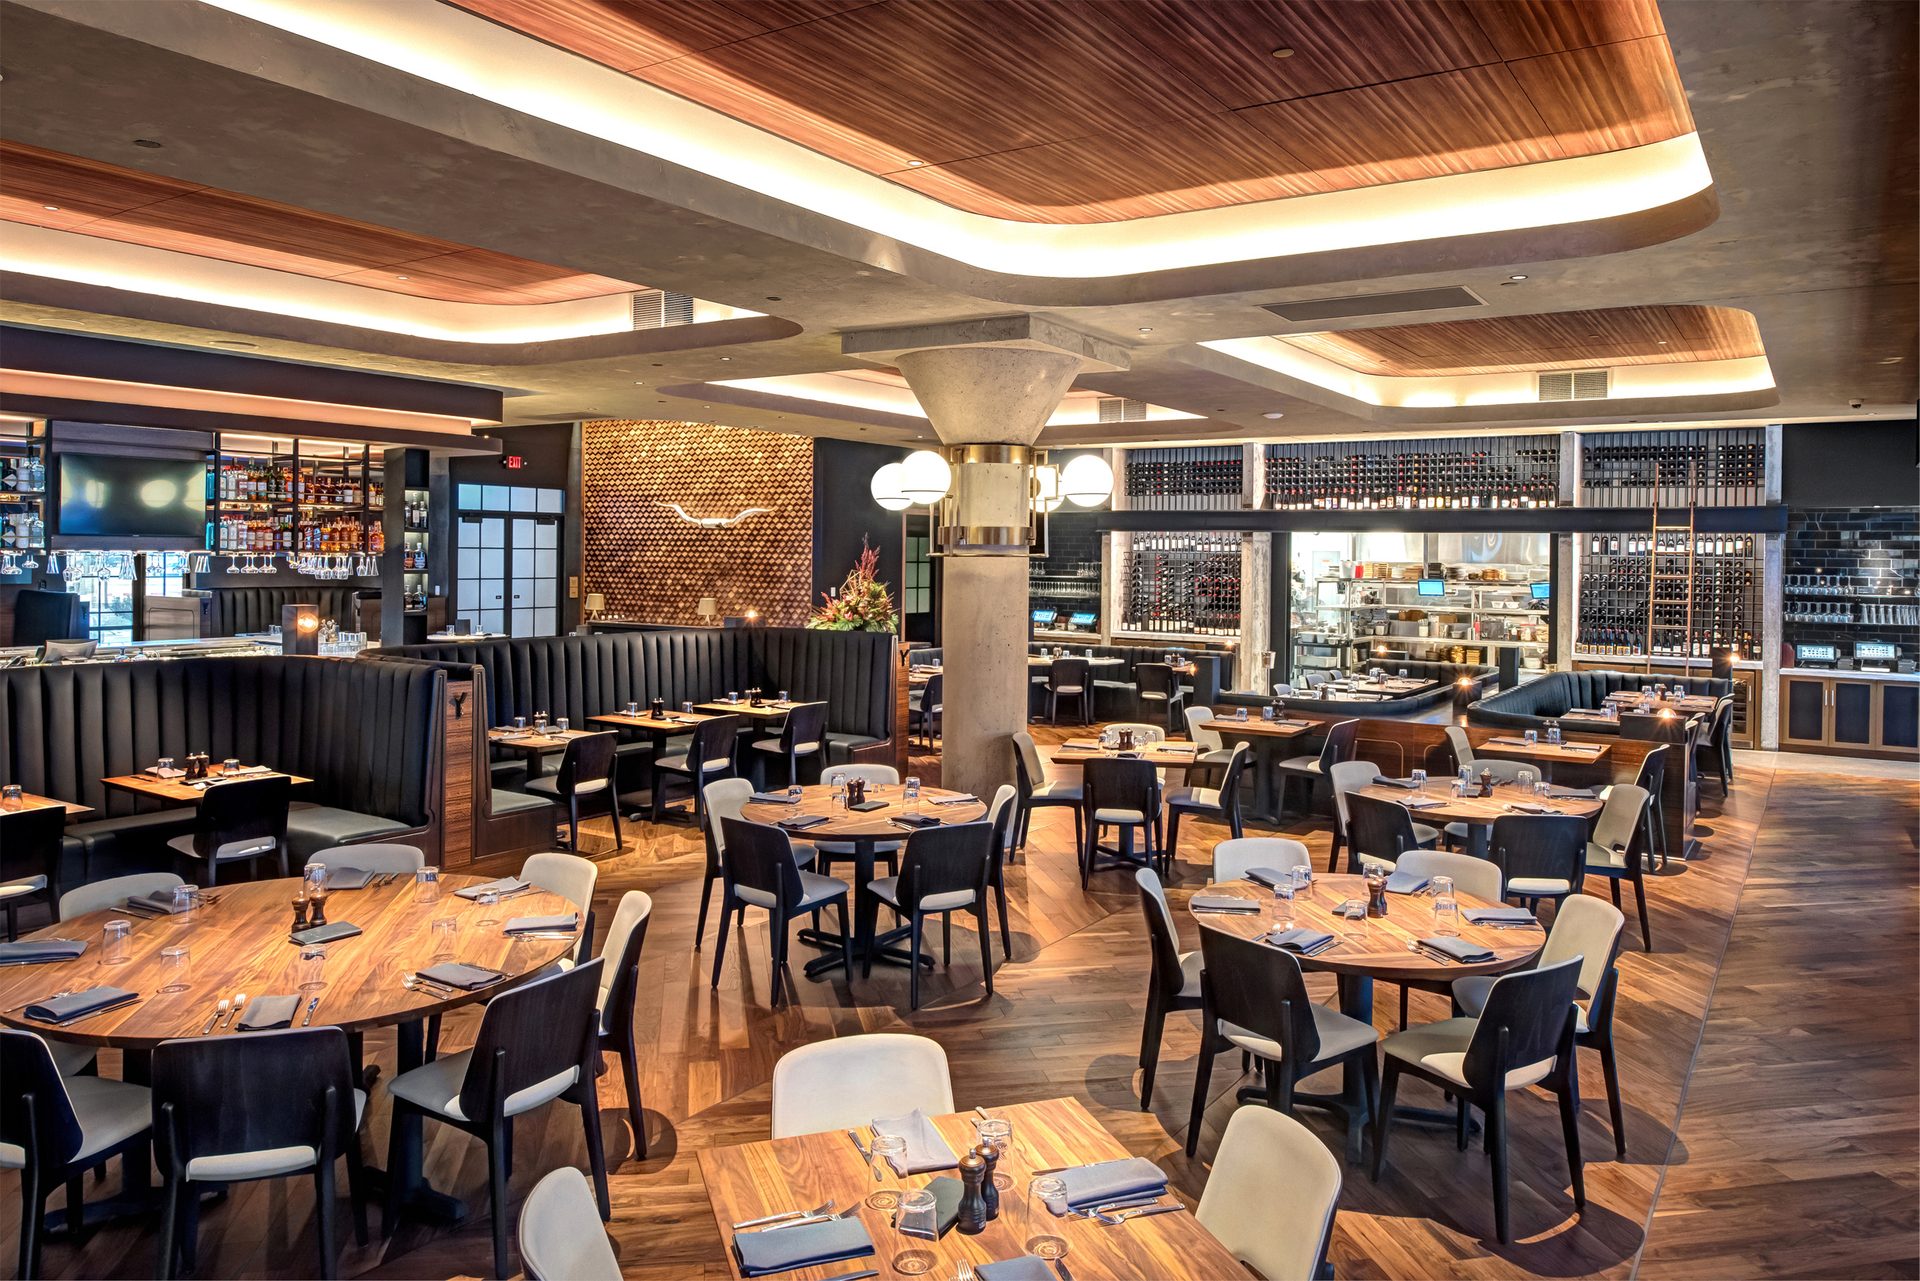 Interior design of modern restaurant with a modern wood finish ceiling system.